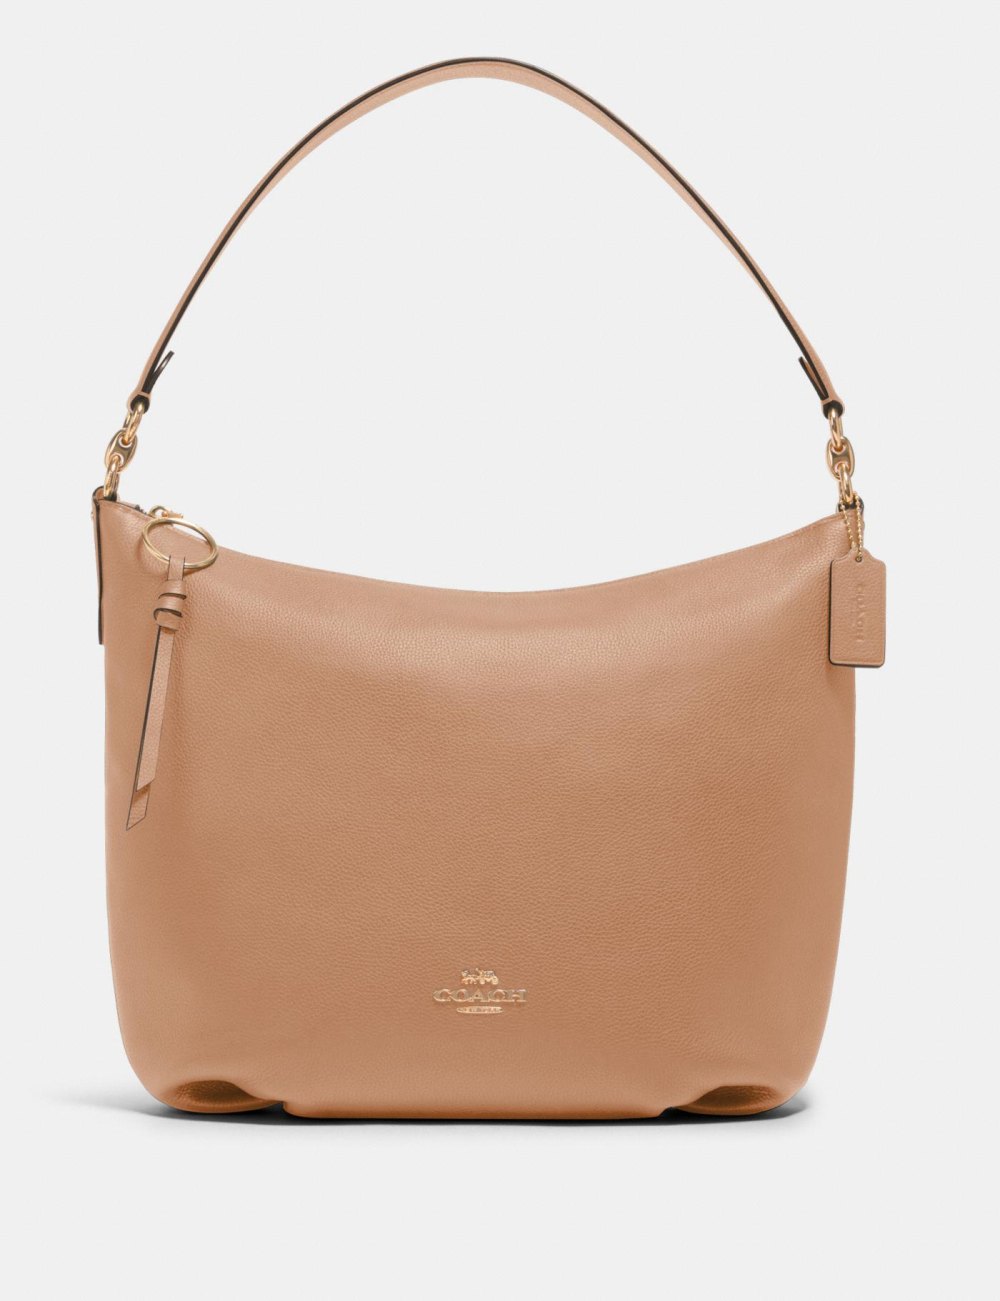 Coach launches big fall sale on handbags and apparel 